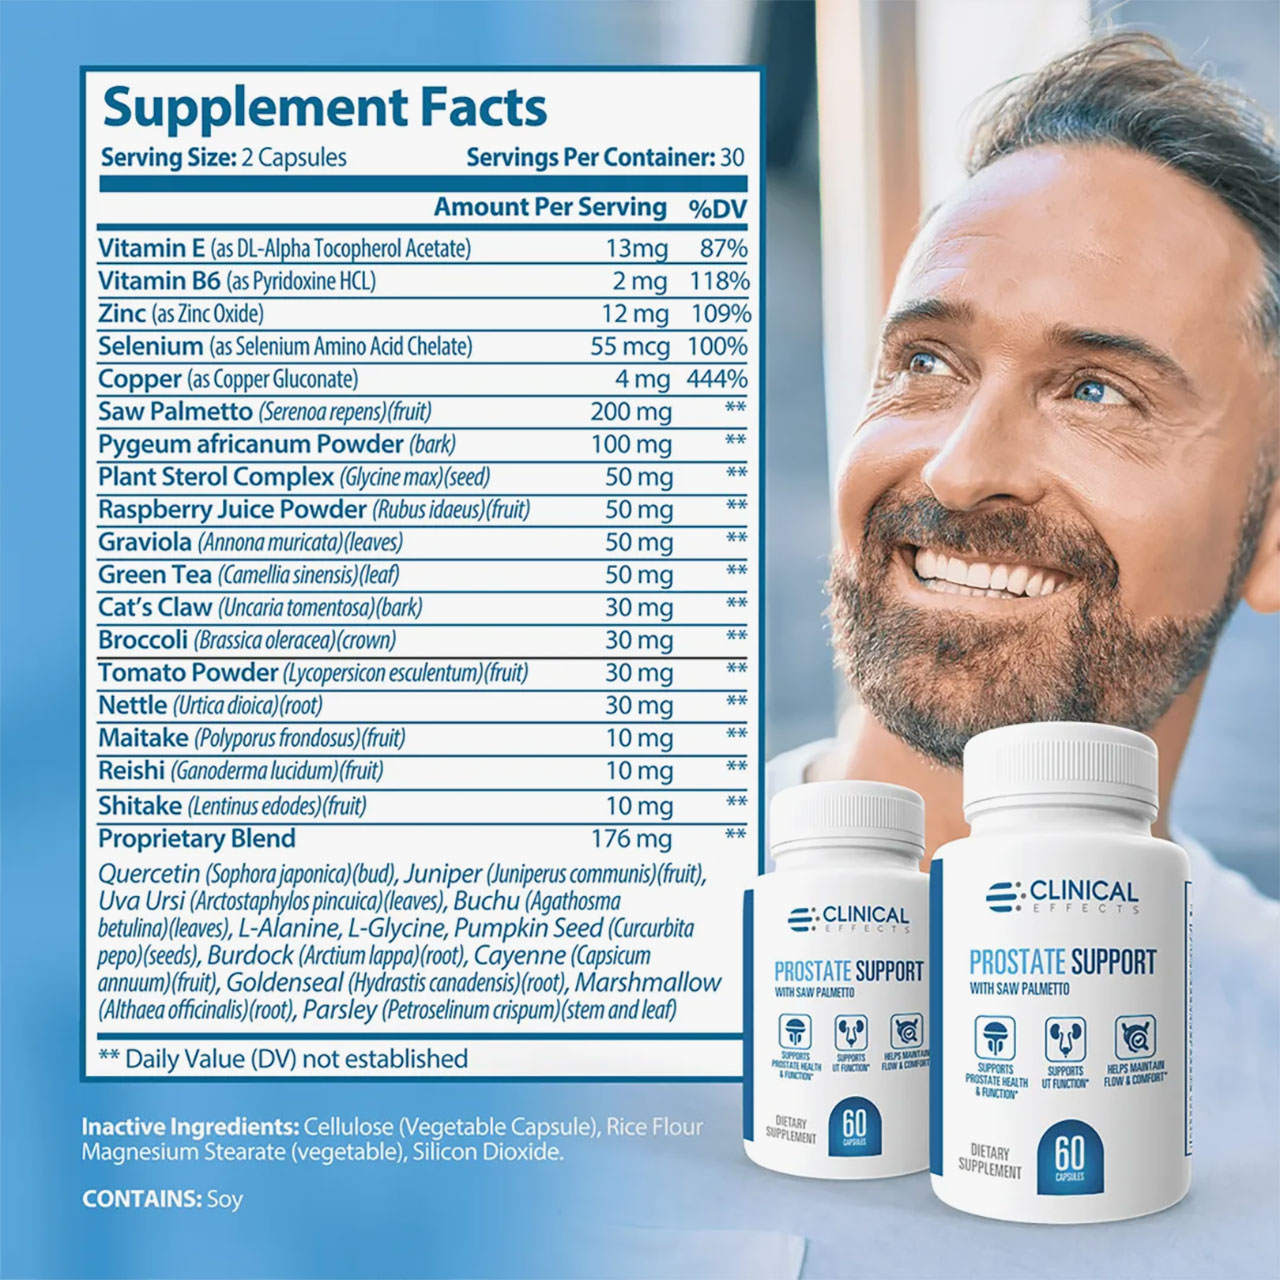 Clinical Effects Prostate Support Supplement Facts Label